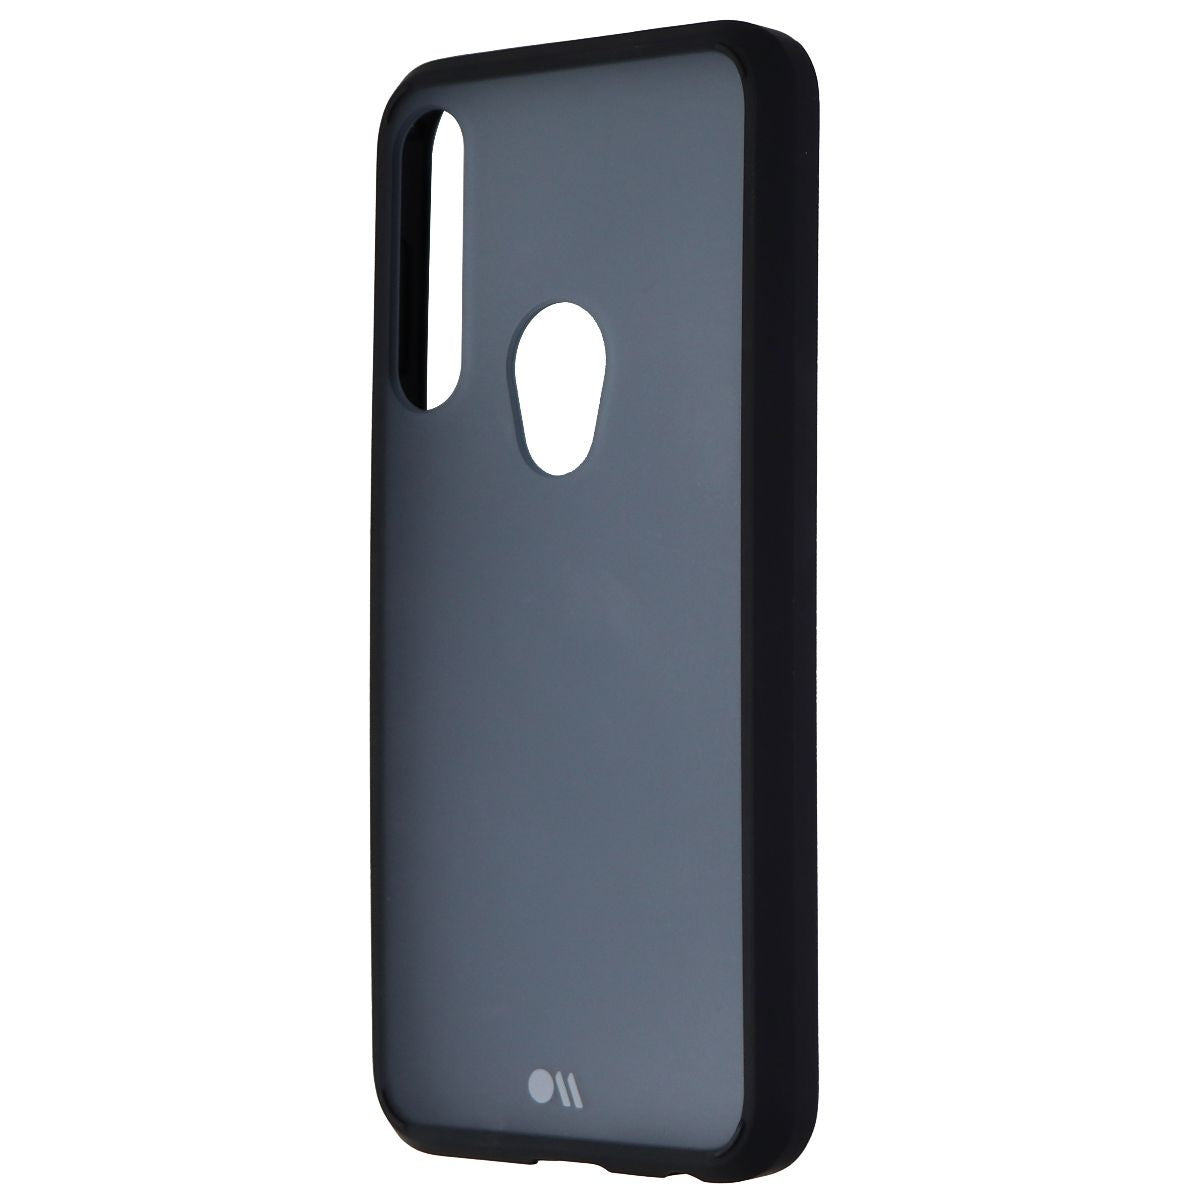 Case-Mate Tough Smoke Hybrid Case for Motorola G Power - Dark Blue Tinted/Black Cell Phone - Cases, Covers & Skins Case-Mate    - Simple Cell Bulk Wholesale Pricing - USA Seller